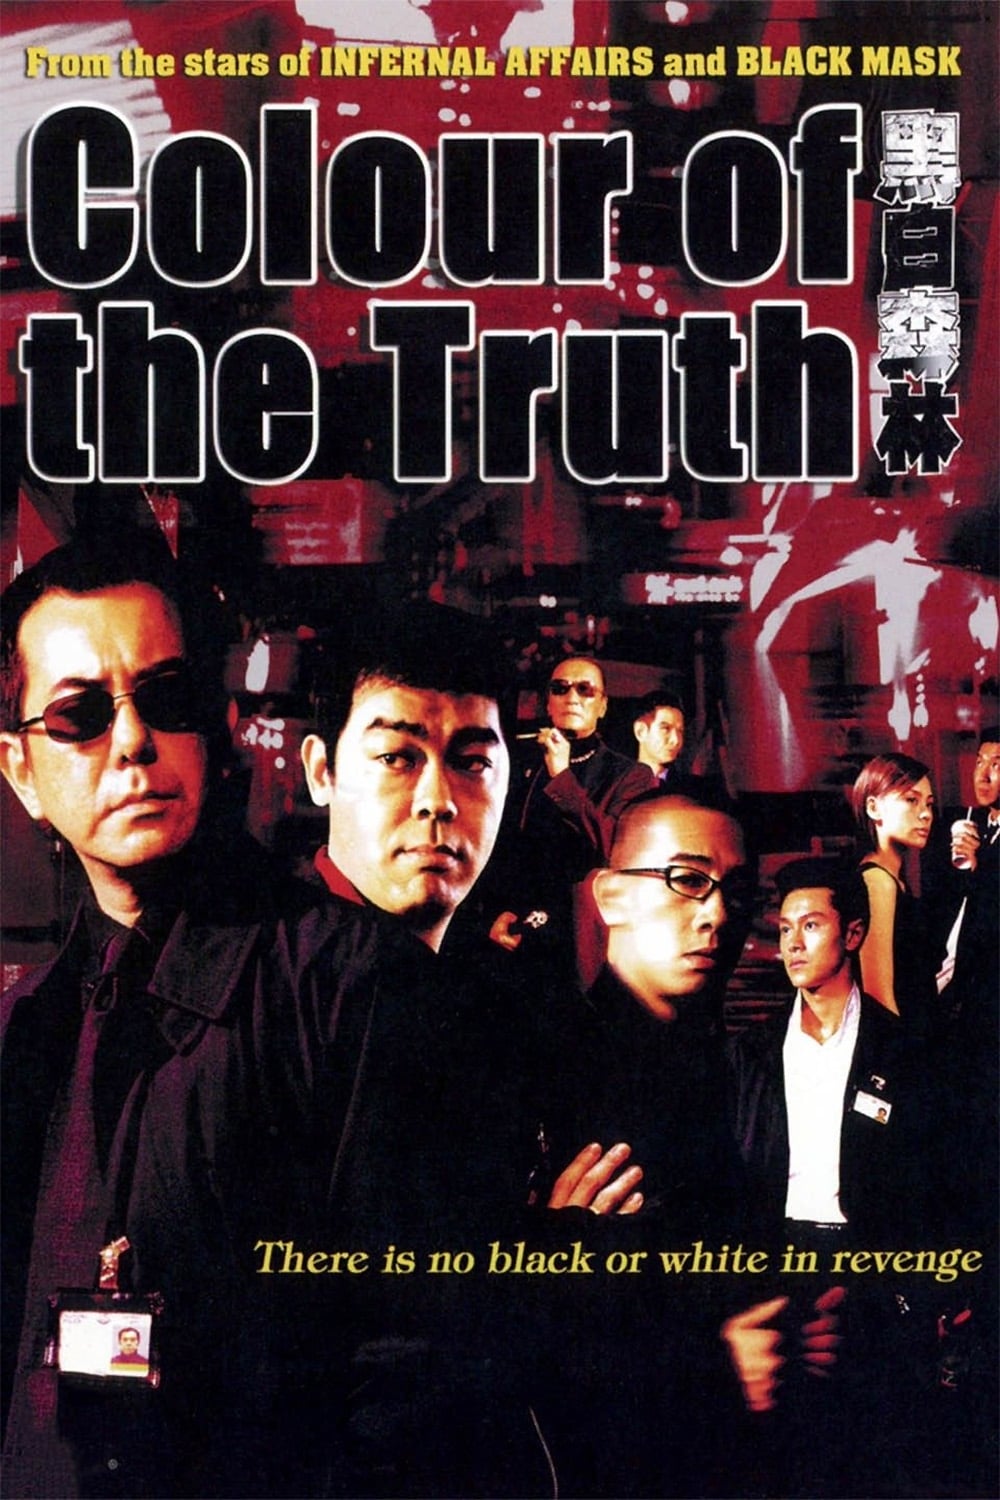 Colour of the Truth (2003)